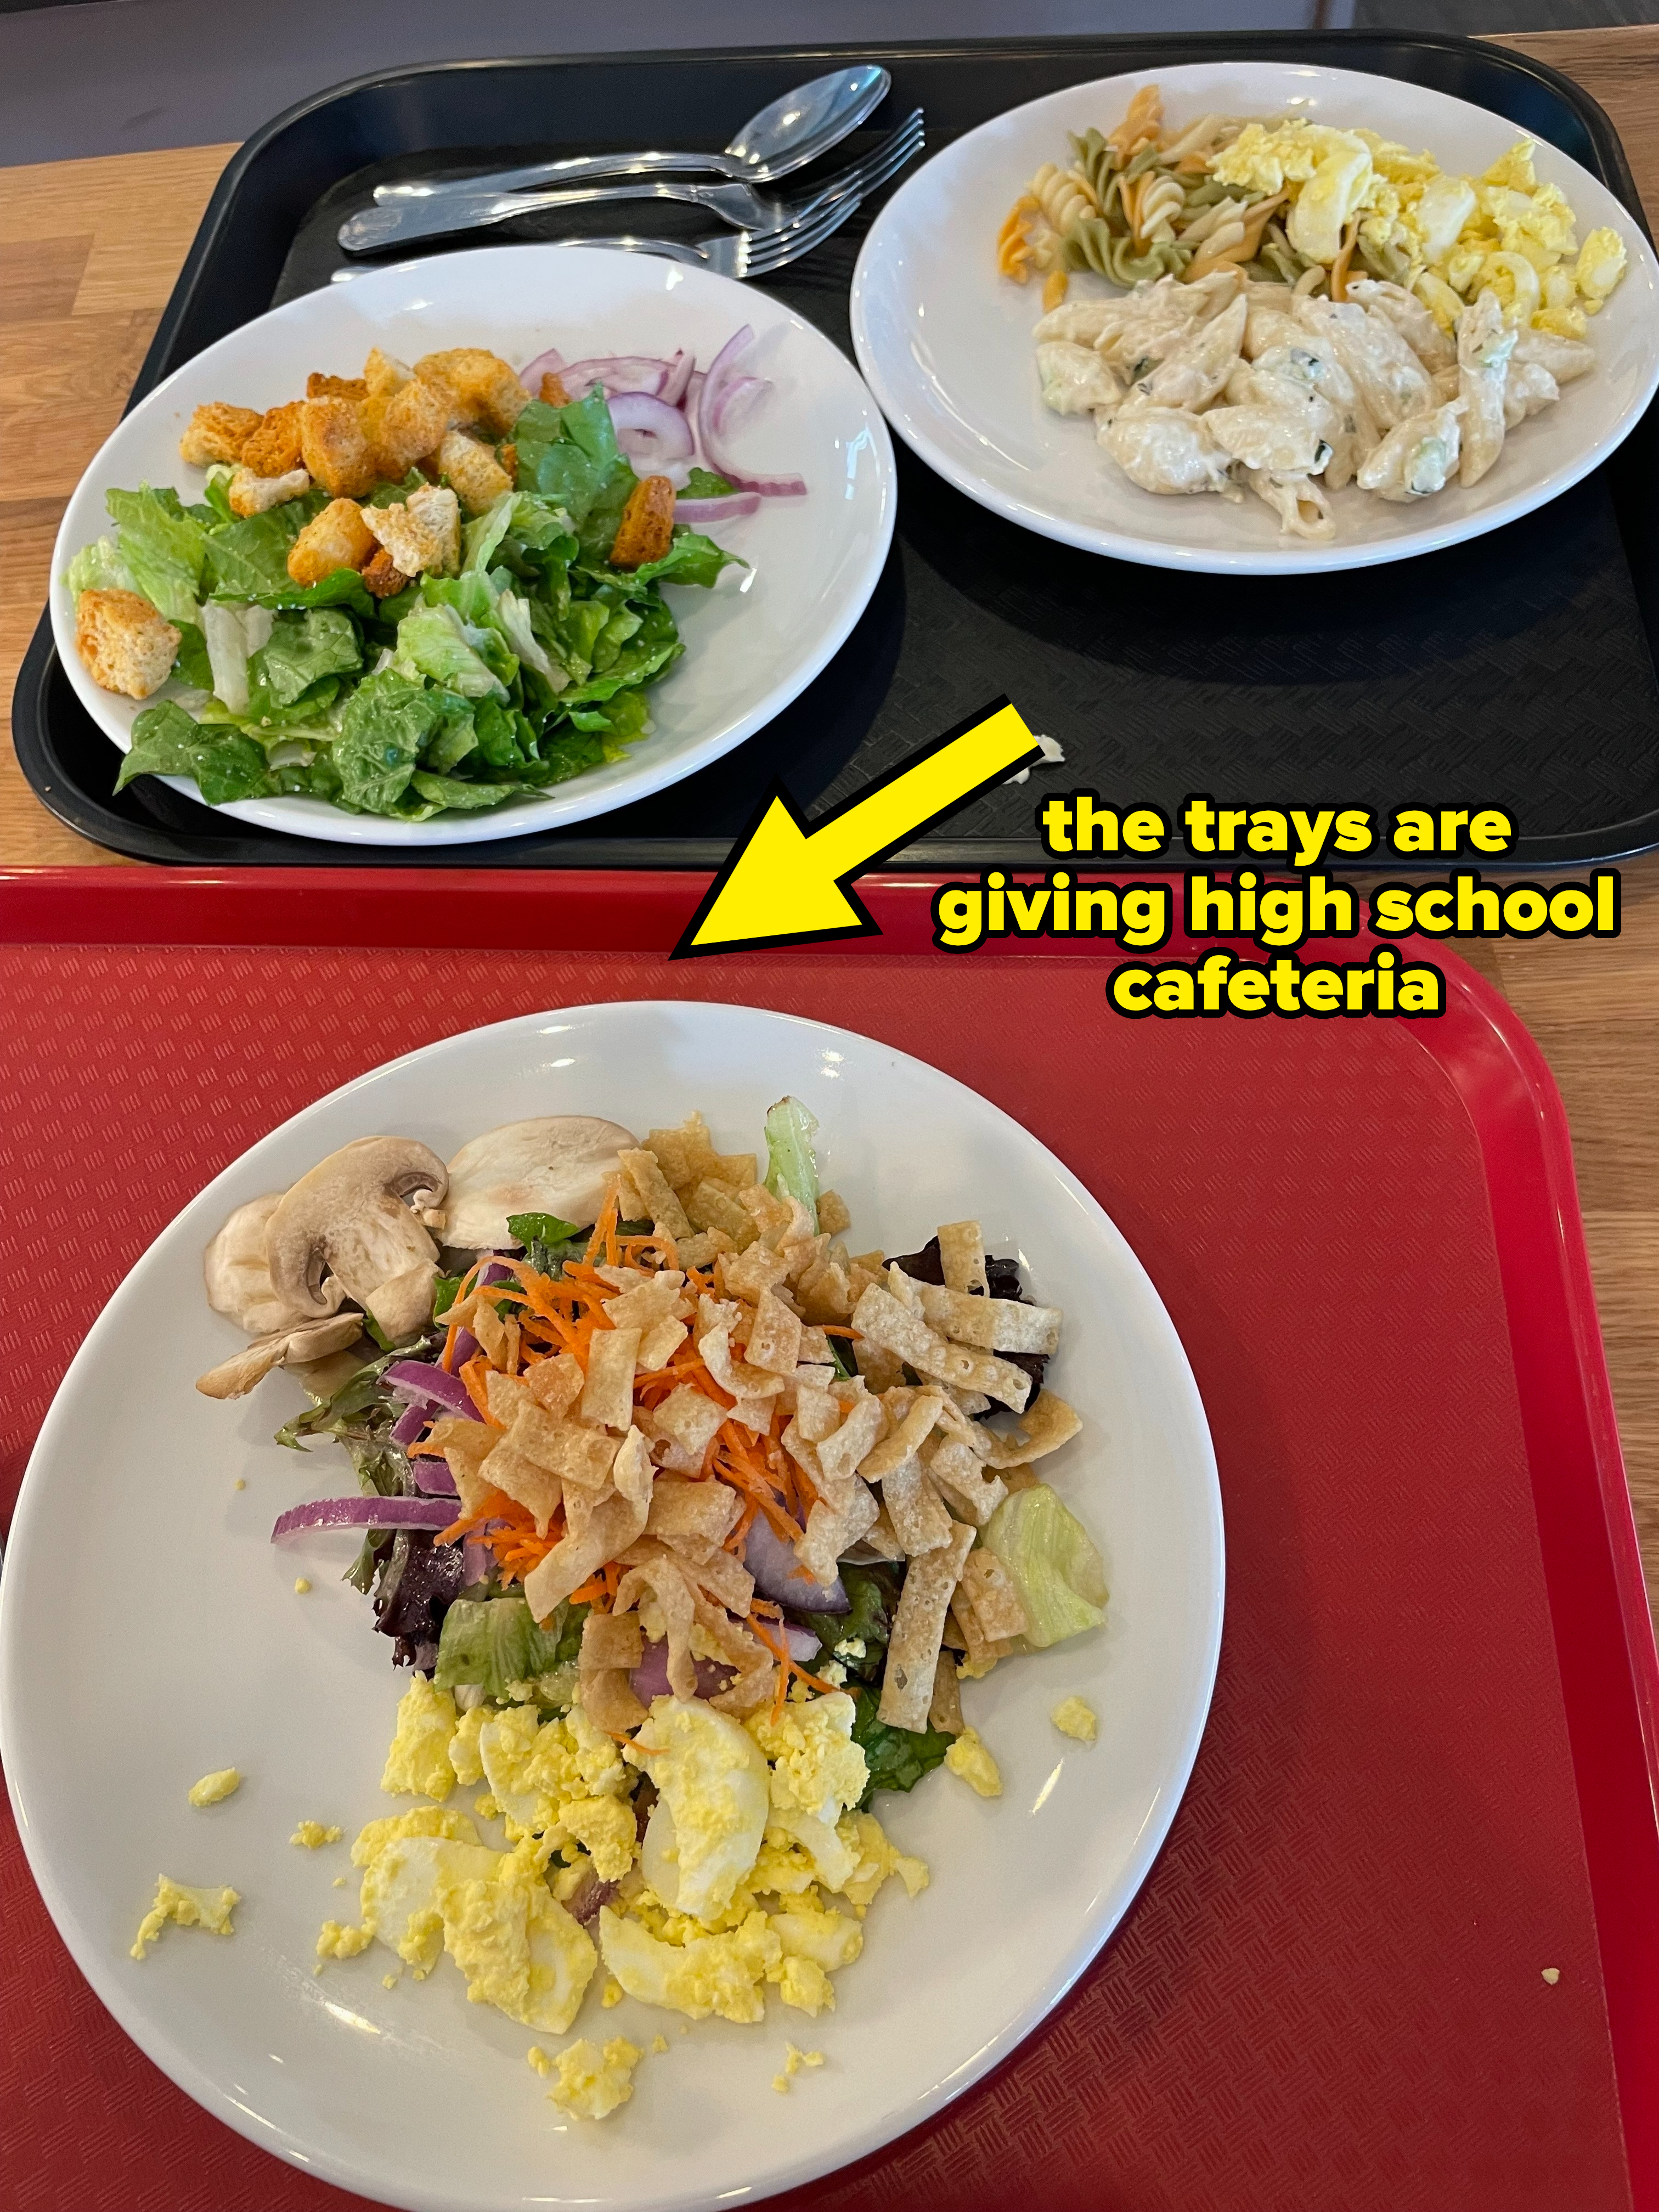 Two cafeteria trays with a salad, scrambled eggs, pasta, and mushrooms